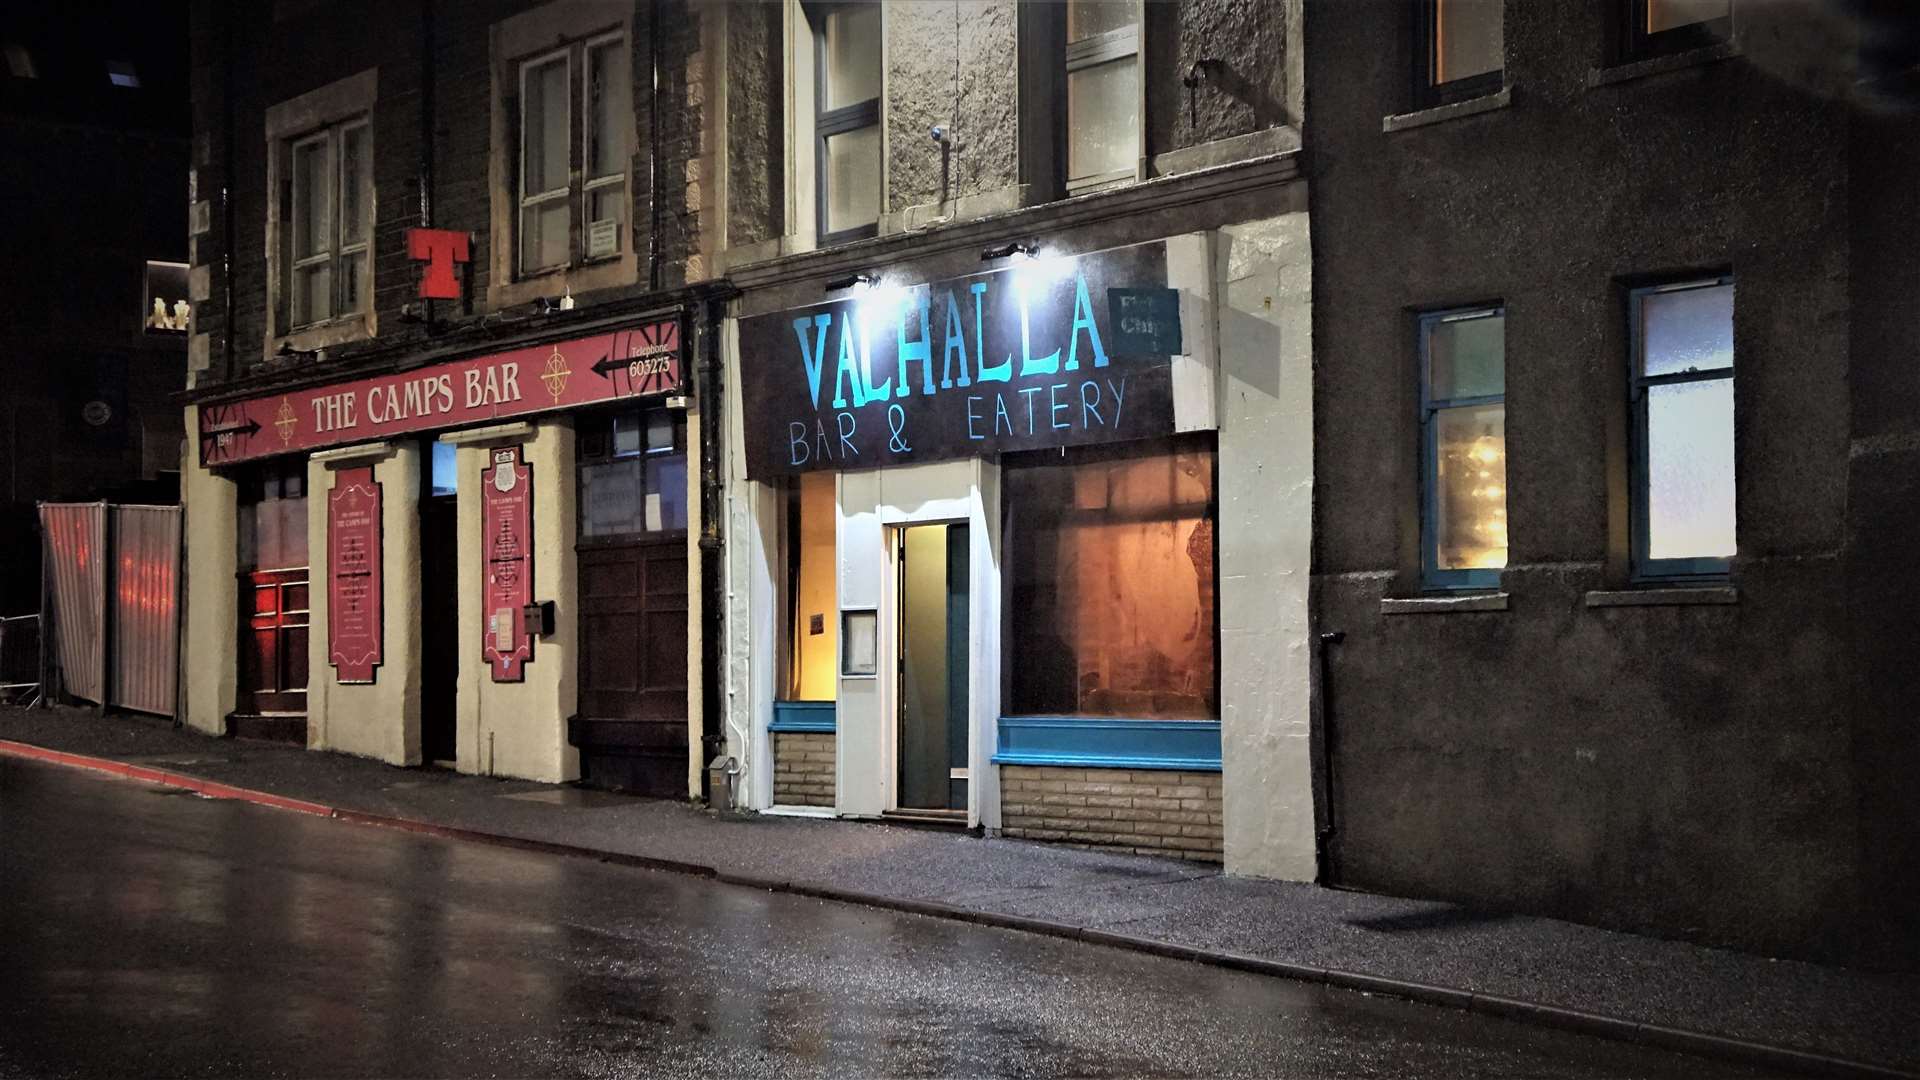 The failed Valhalla Bar and Eatery in Wick. Many locals commented on the amateur paint job done for the name sign. Picture: DGS